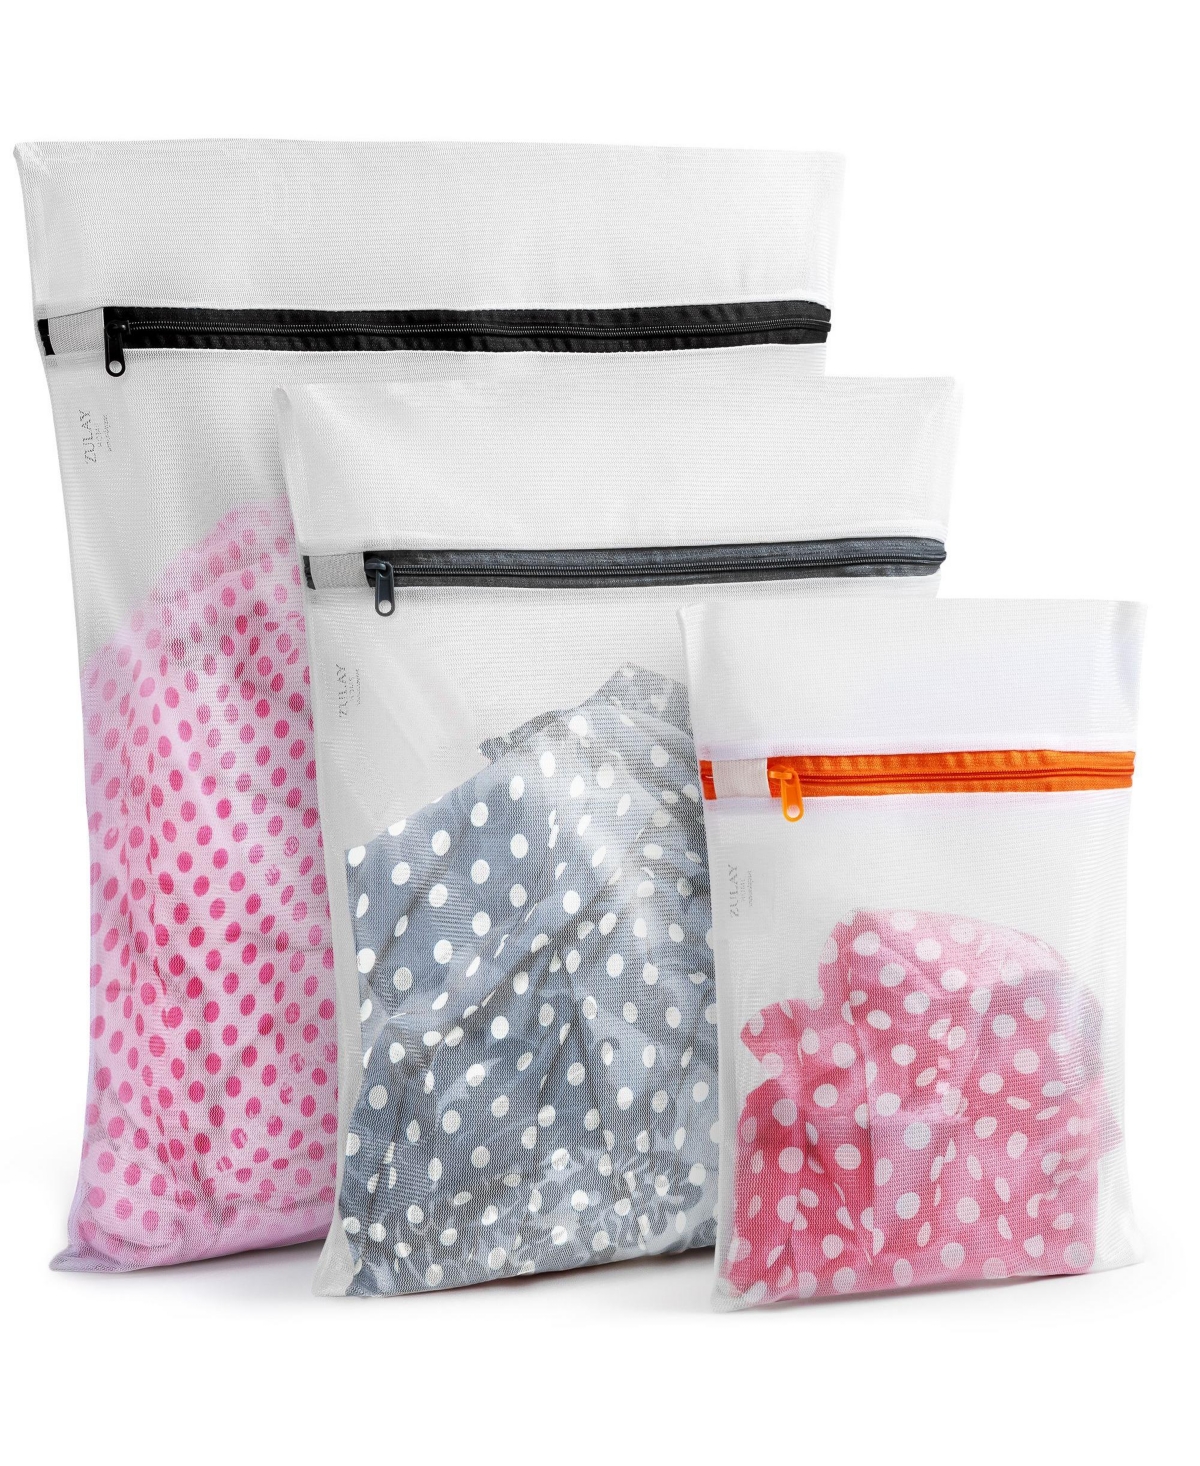 Reusable Mesh Laundry Bags for Delicates and Washing Machine - pack mix